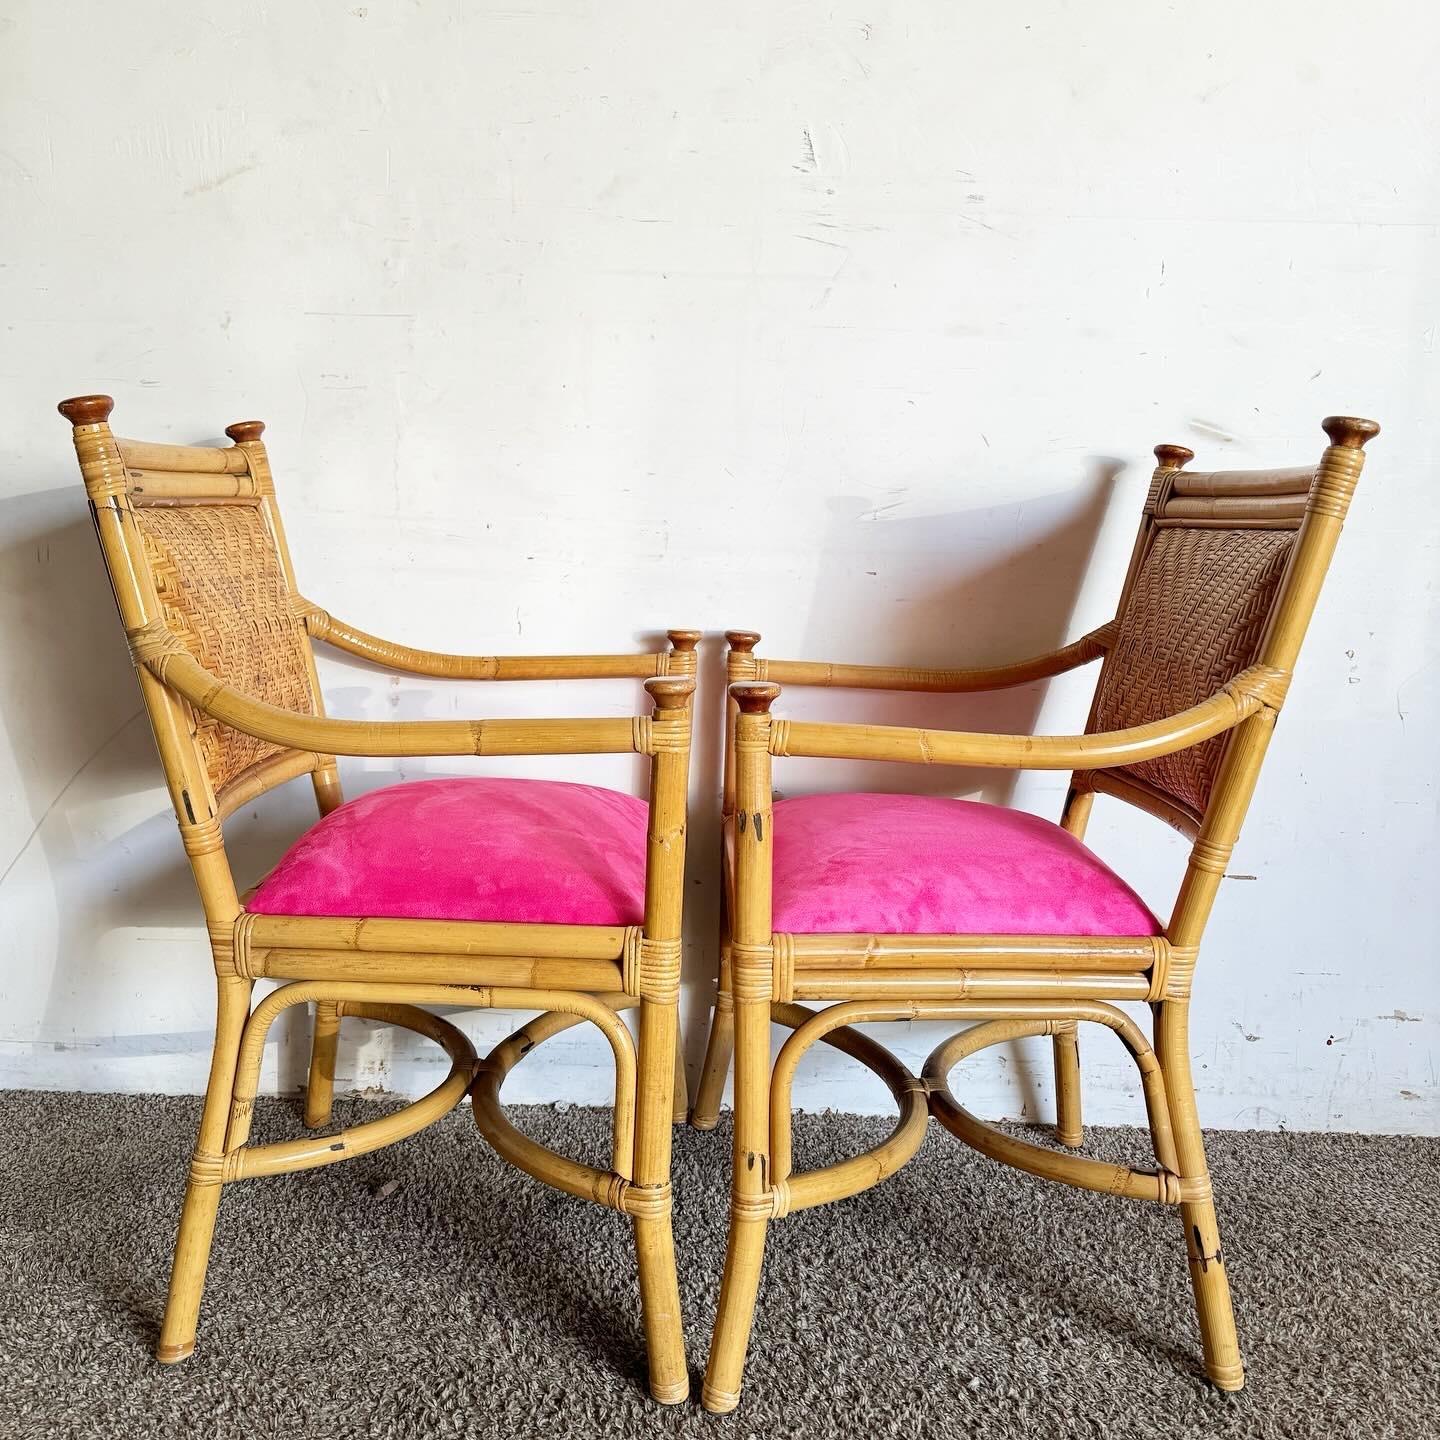 Boho Chic Wicker Rattan Bamboo Dining Arm Chairs With Hot Pink Cushions For Sale 2